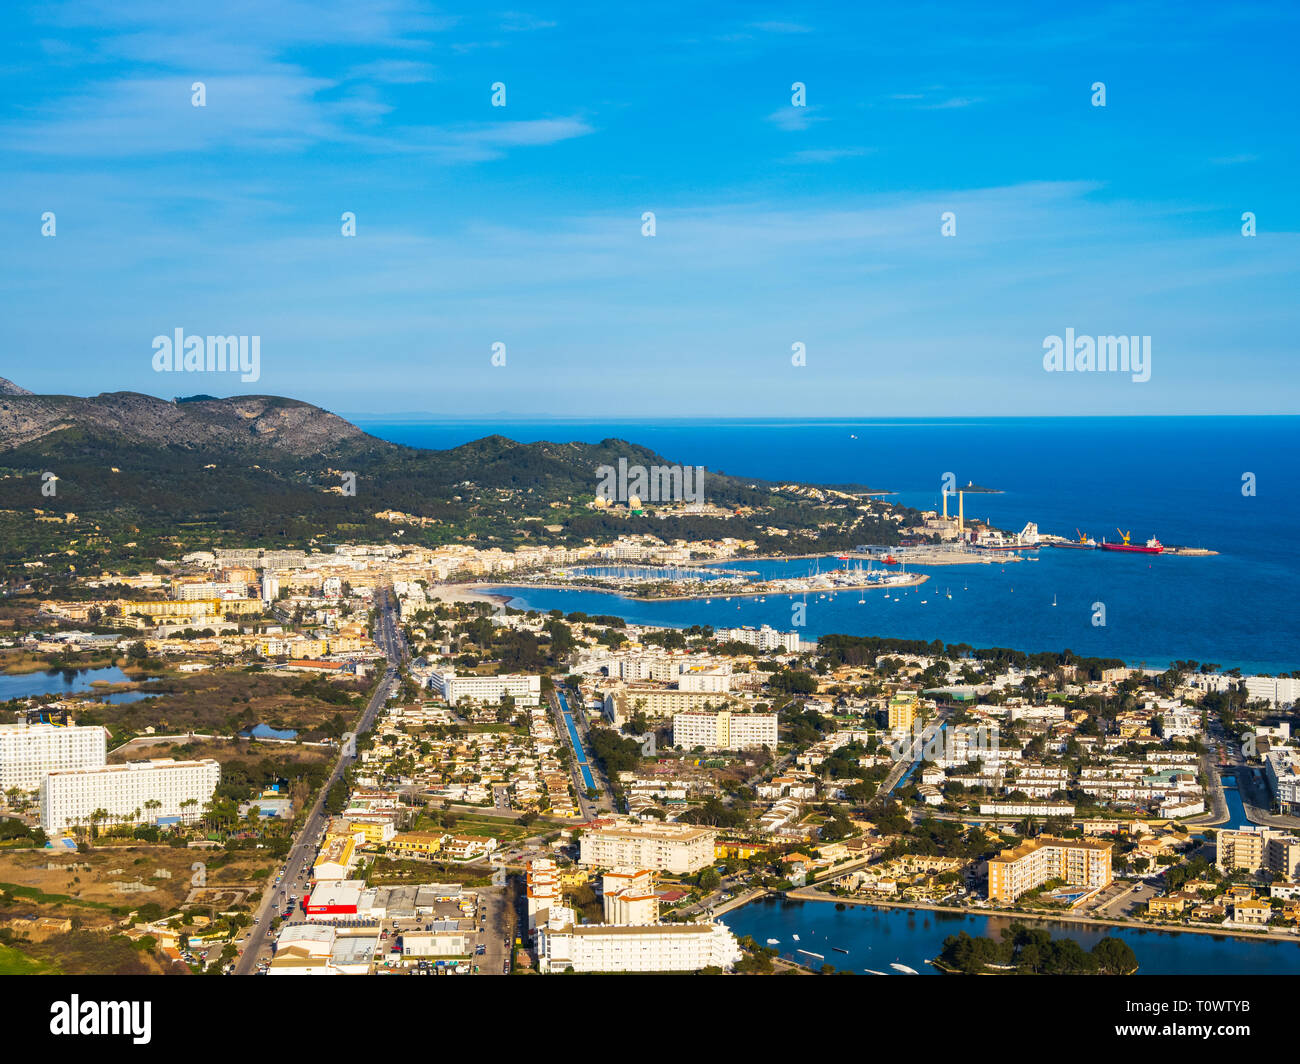 Aerial view of the Port of Alcudia, Mallorca, Baleares, Spain Stock Photo